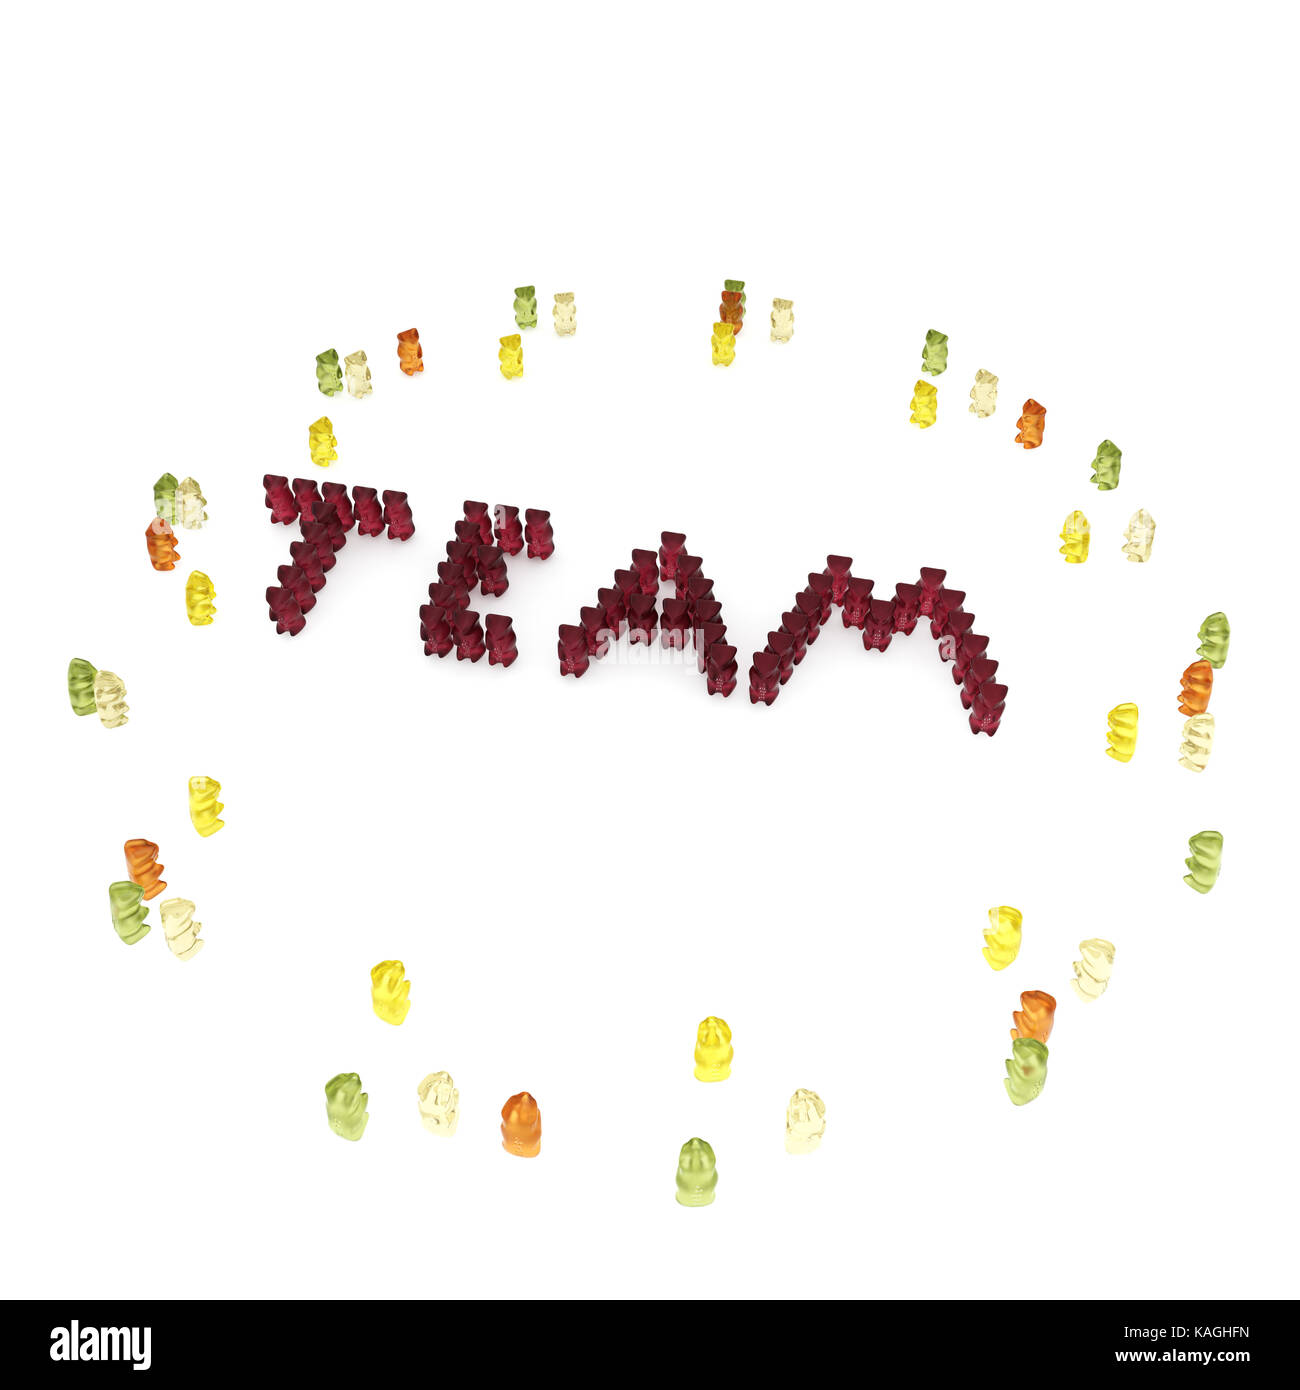 The word 'team' composed from many red gummy bears. Stock Photo